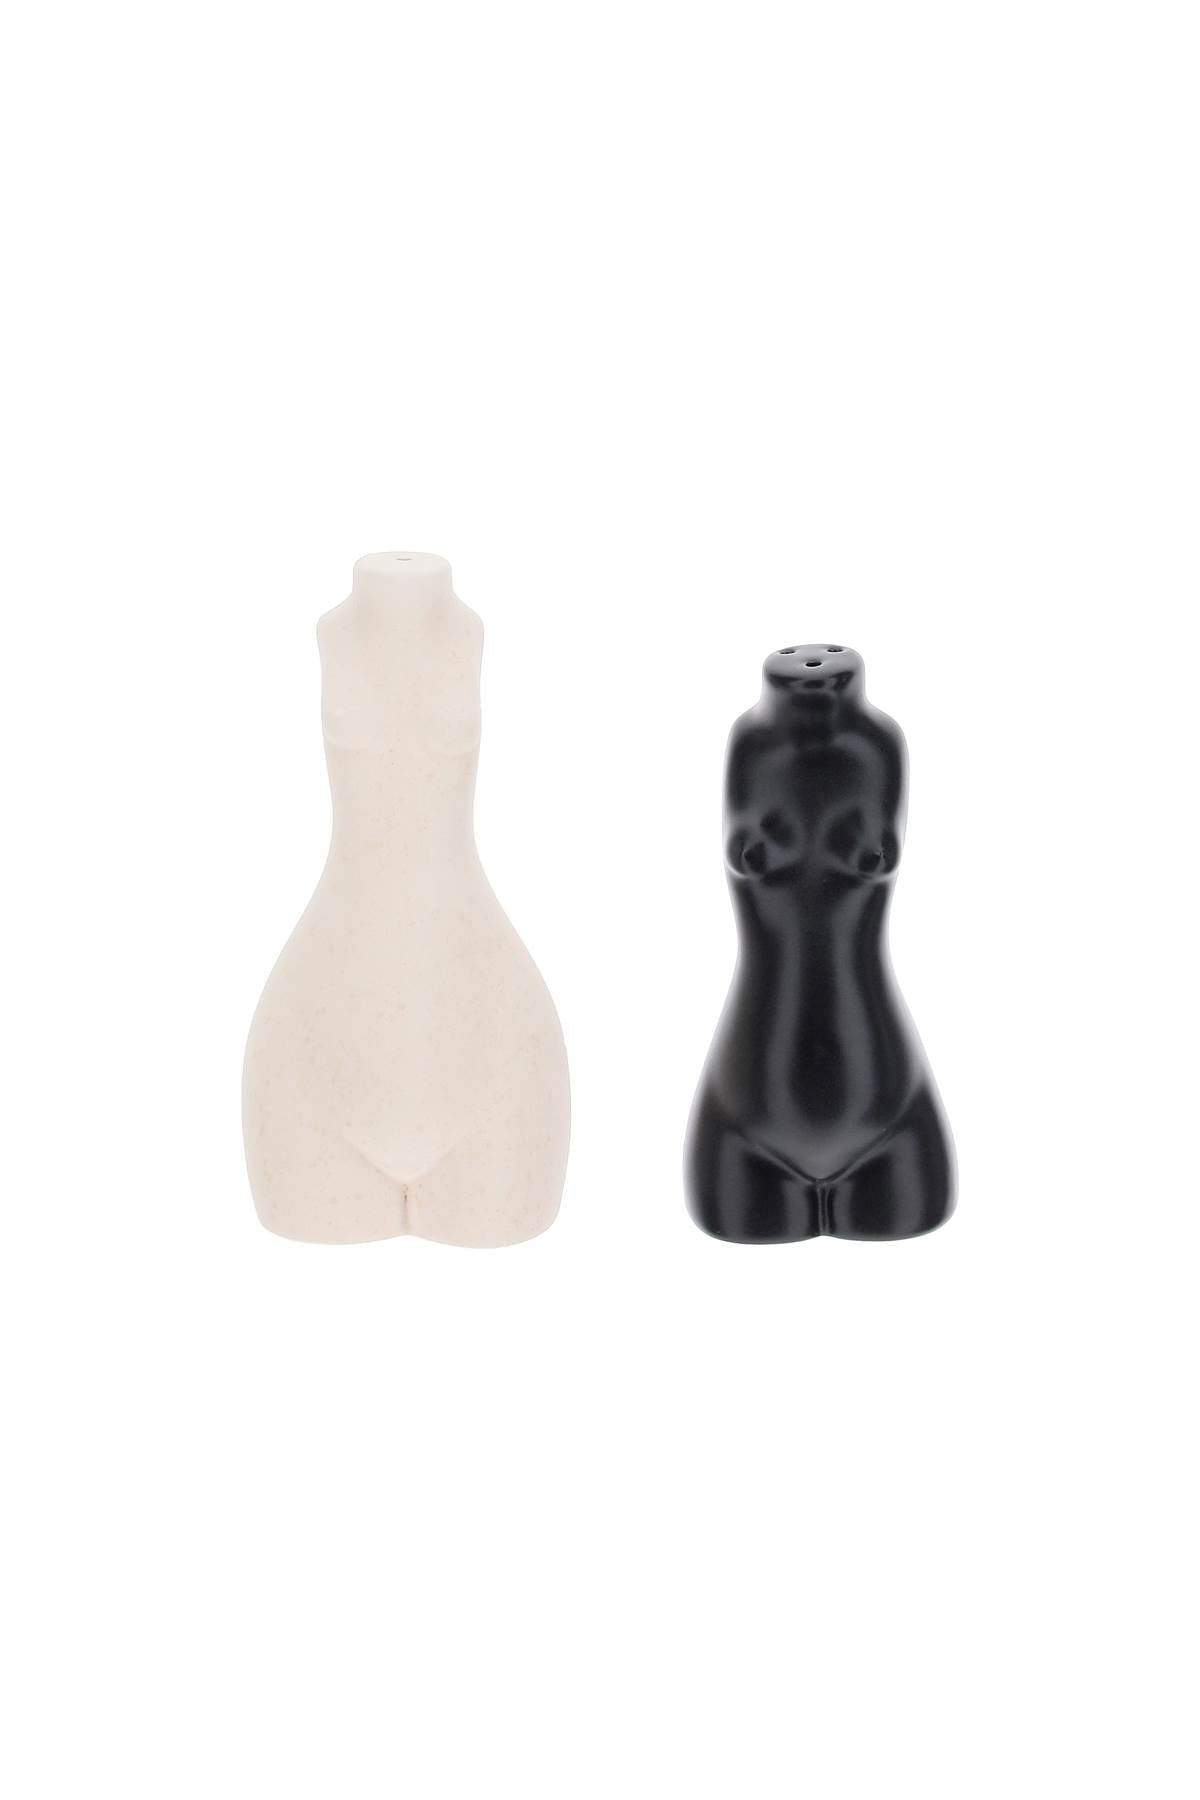 Anissa kermiche body salt and pepper shakers-0